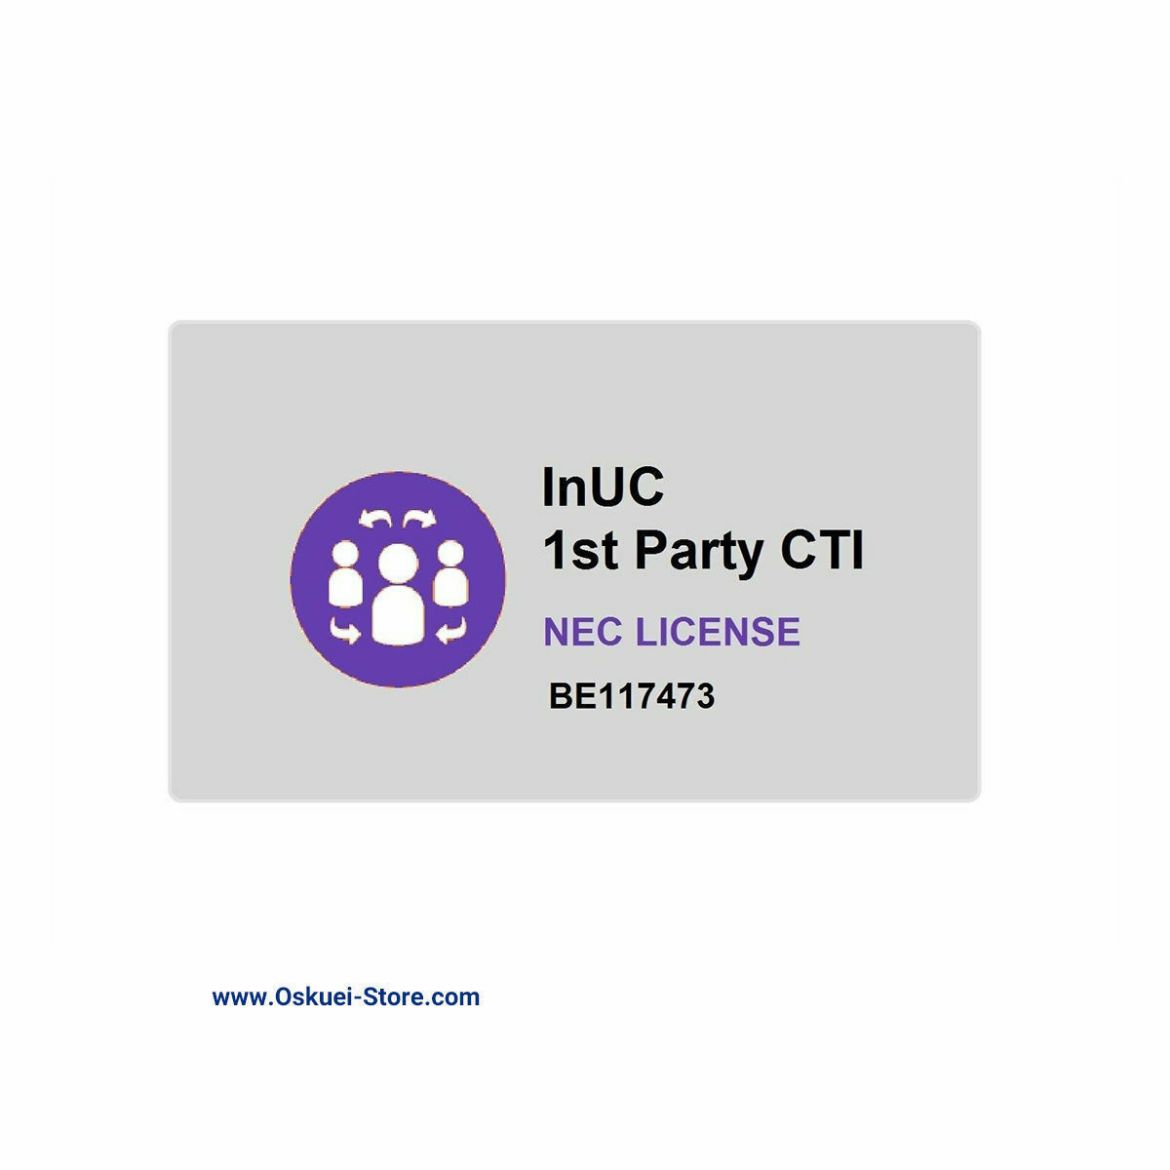 SL2100 In UC First Party CTI NEC License